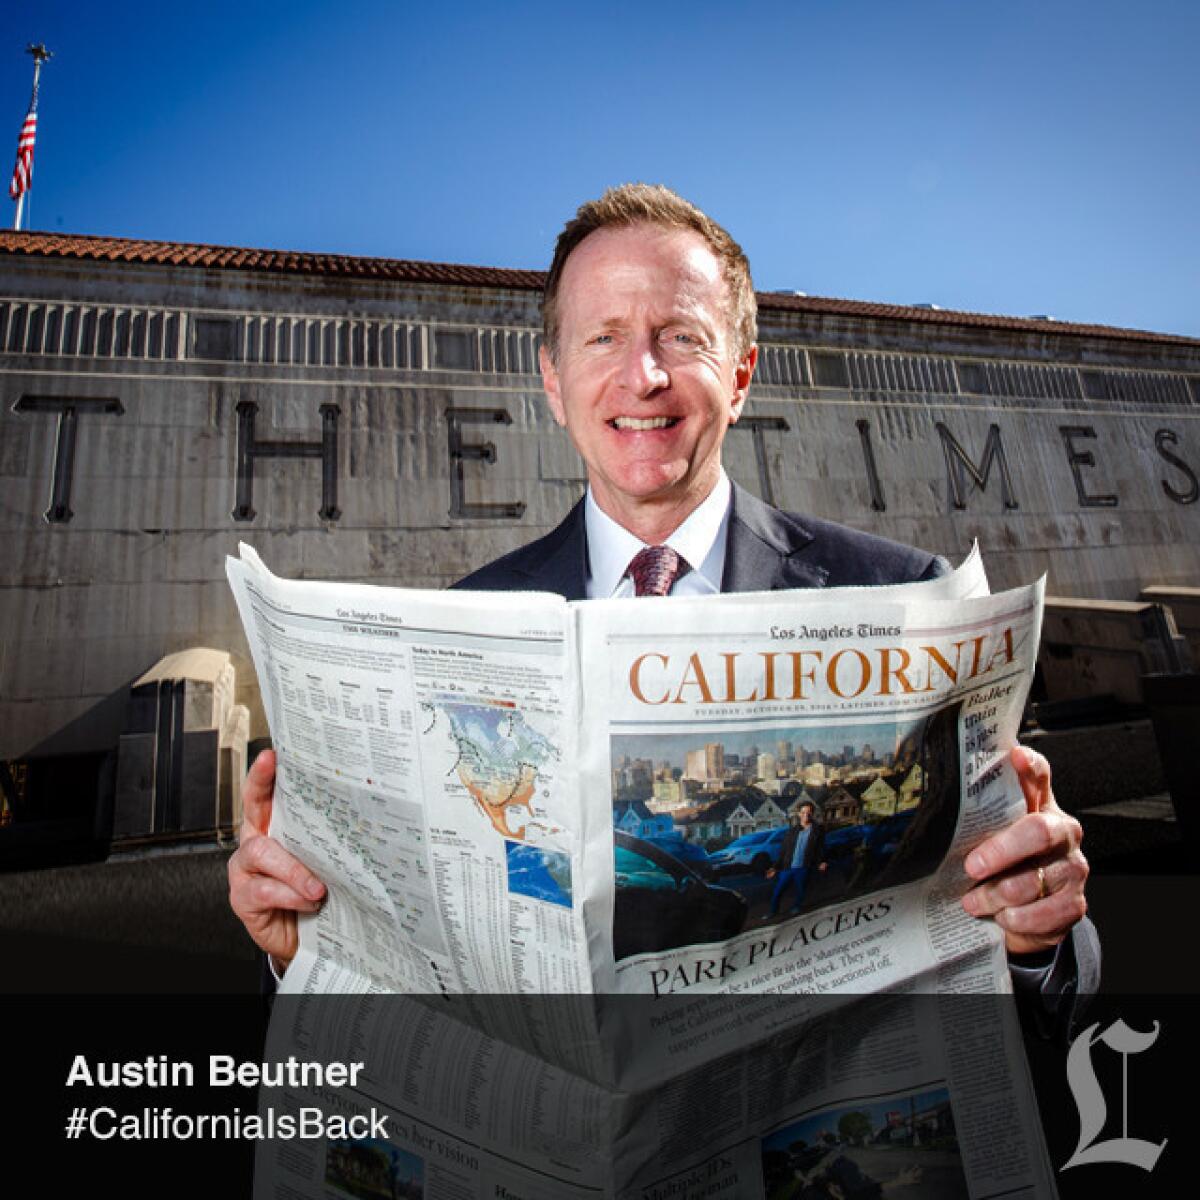 Austin Beutner, LA Times Publisher and CEO.